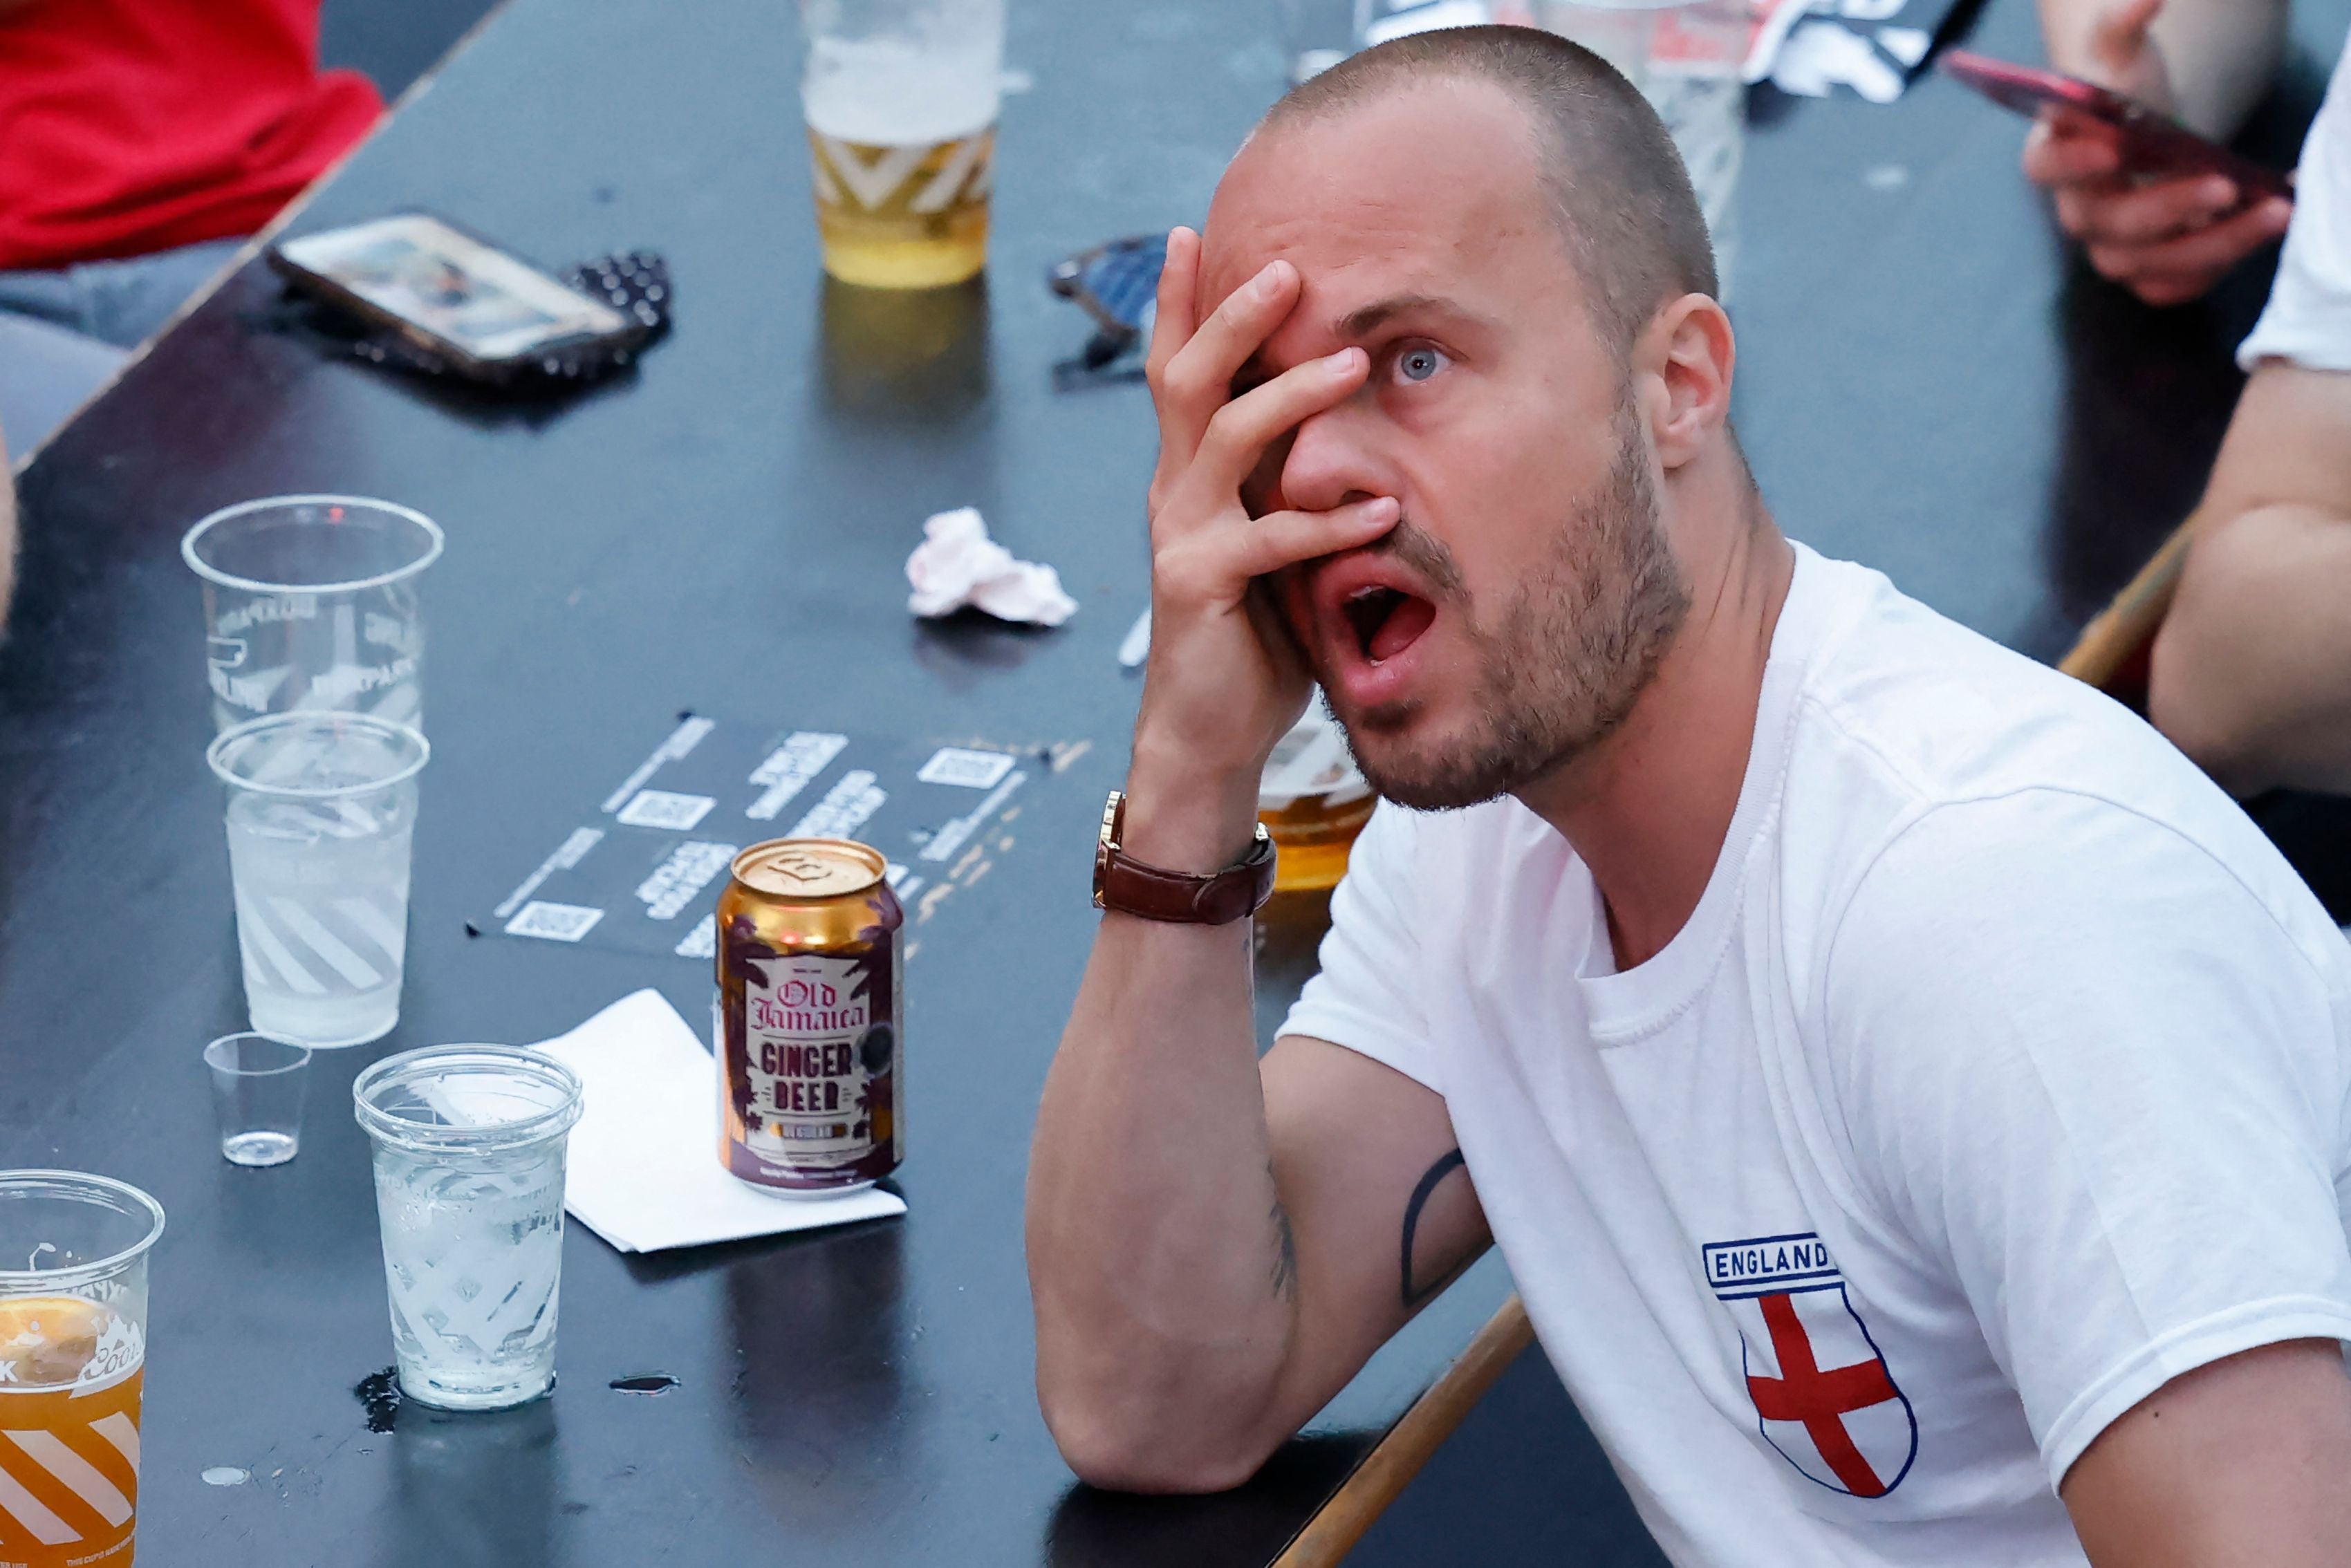 England fans in Trafalgar Square were dismayed at Denmark’s first goal